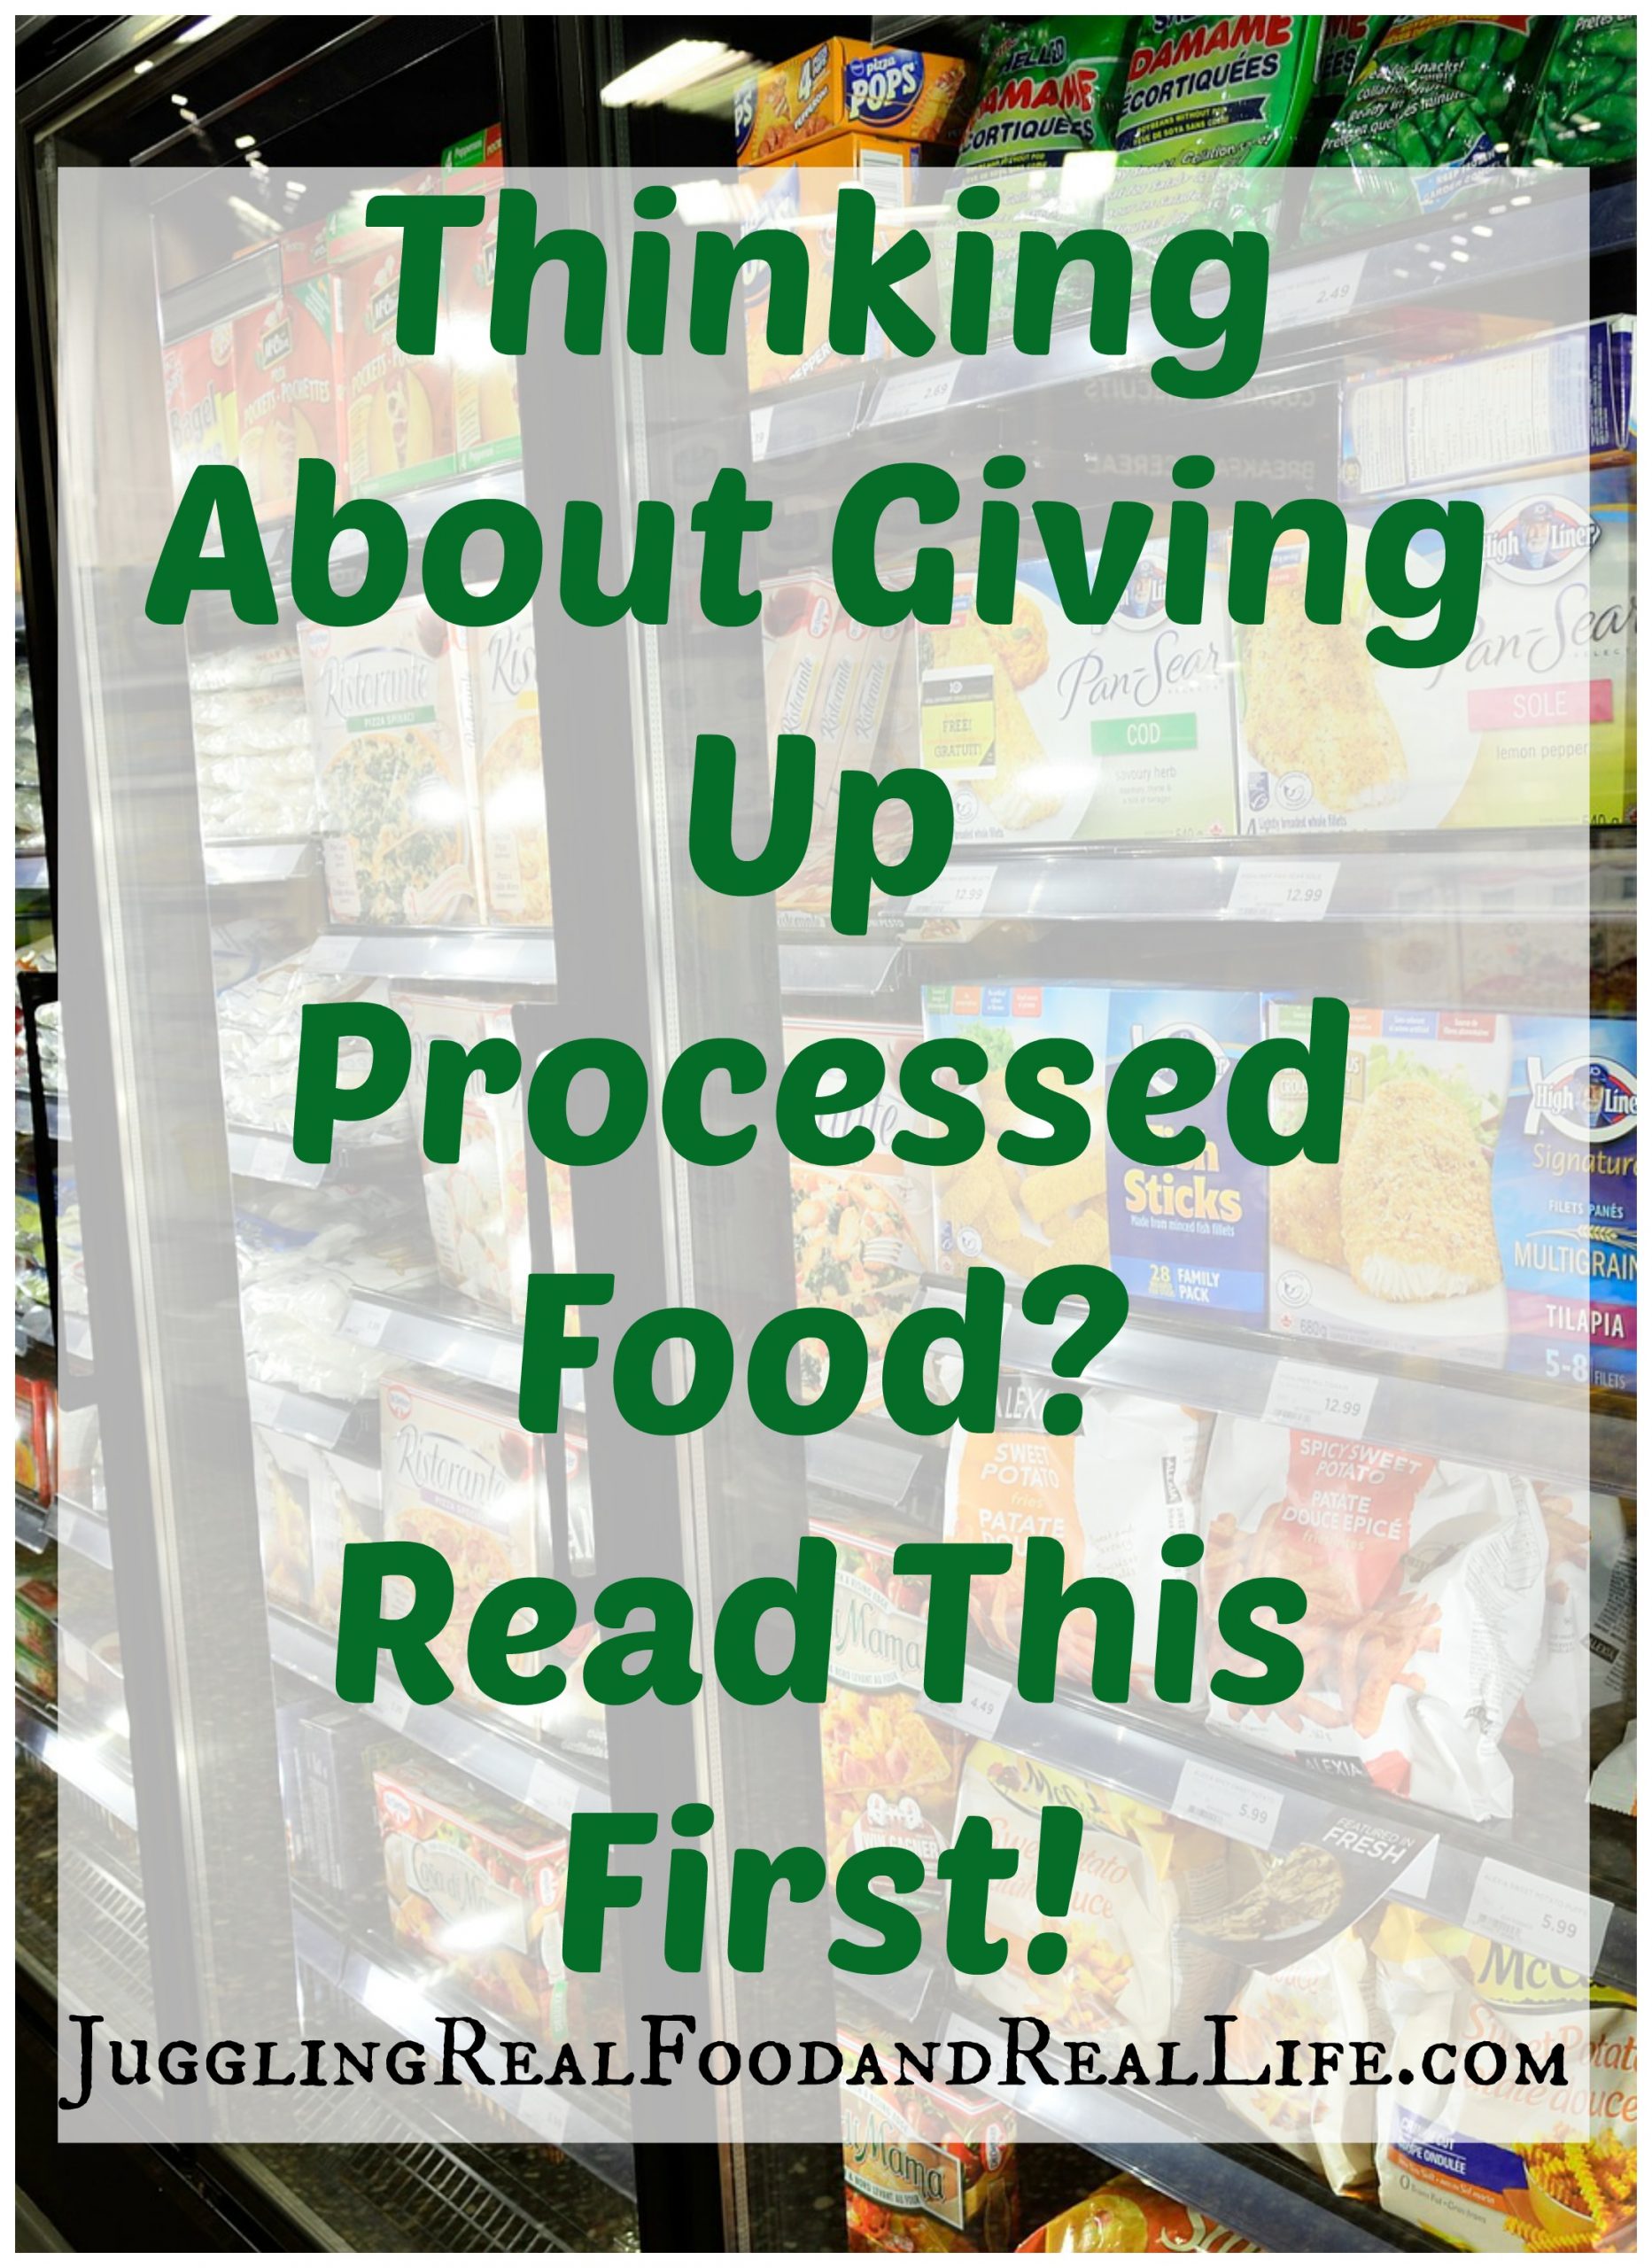 Thinking About Giving Up Processed Food? Read This First.